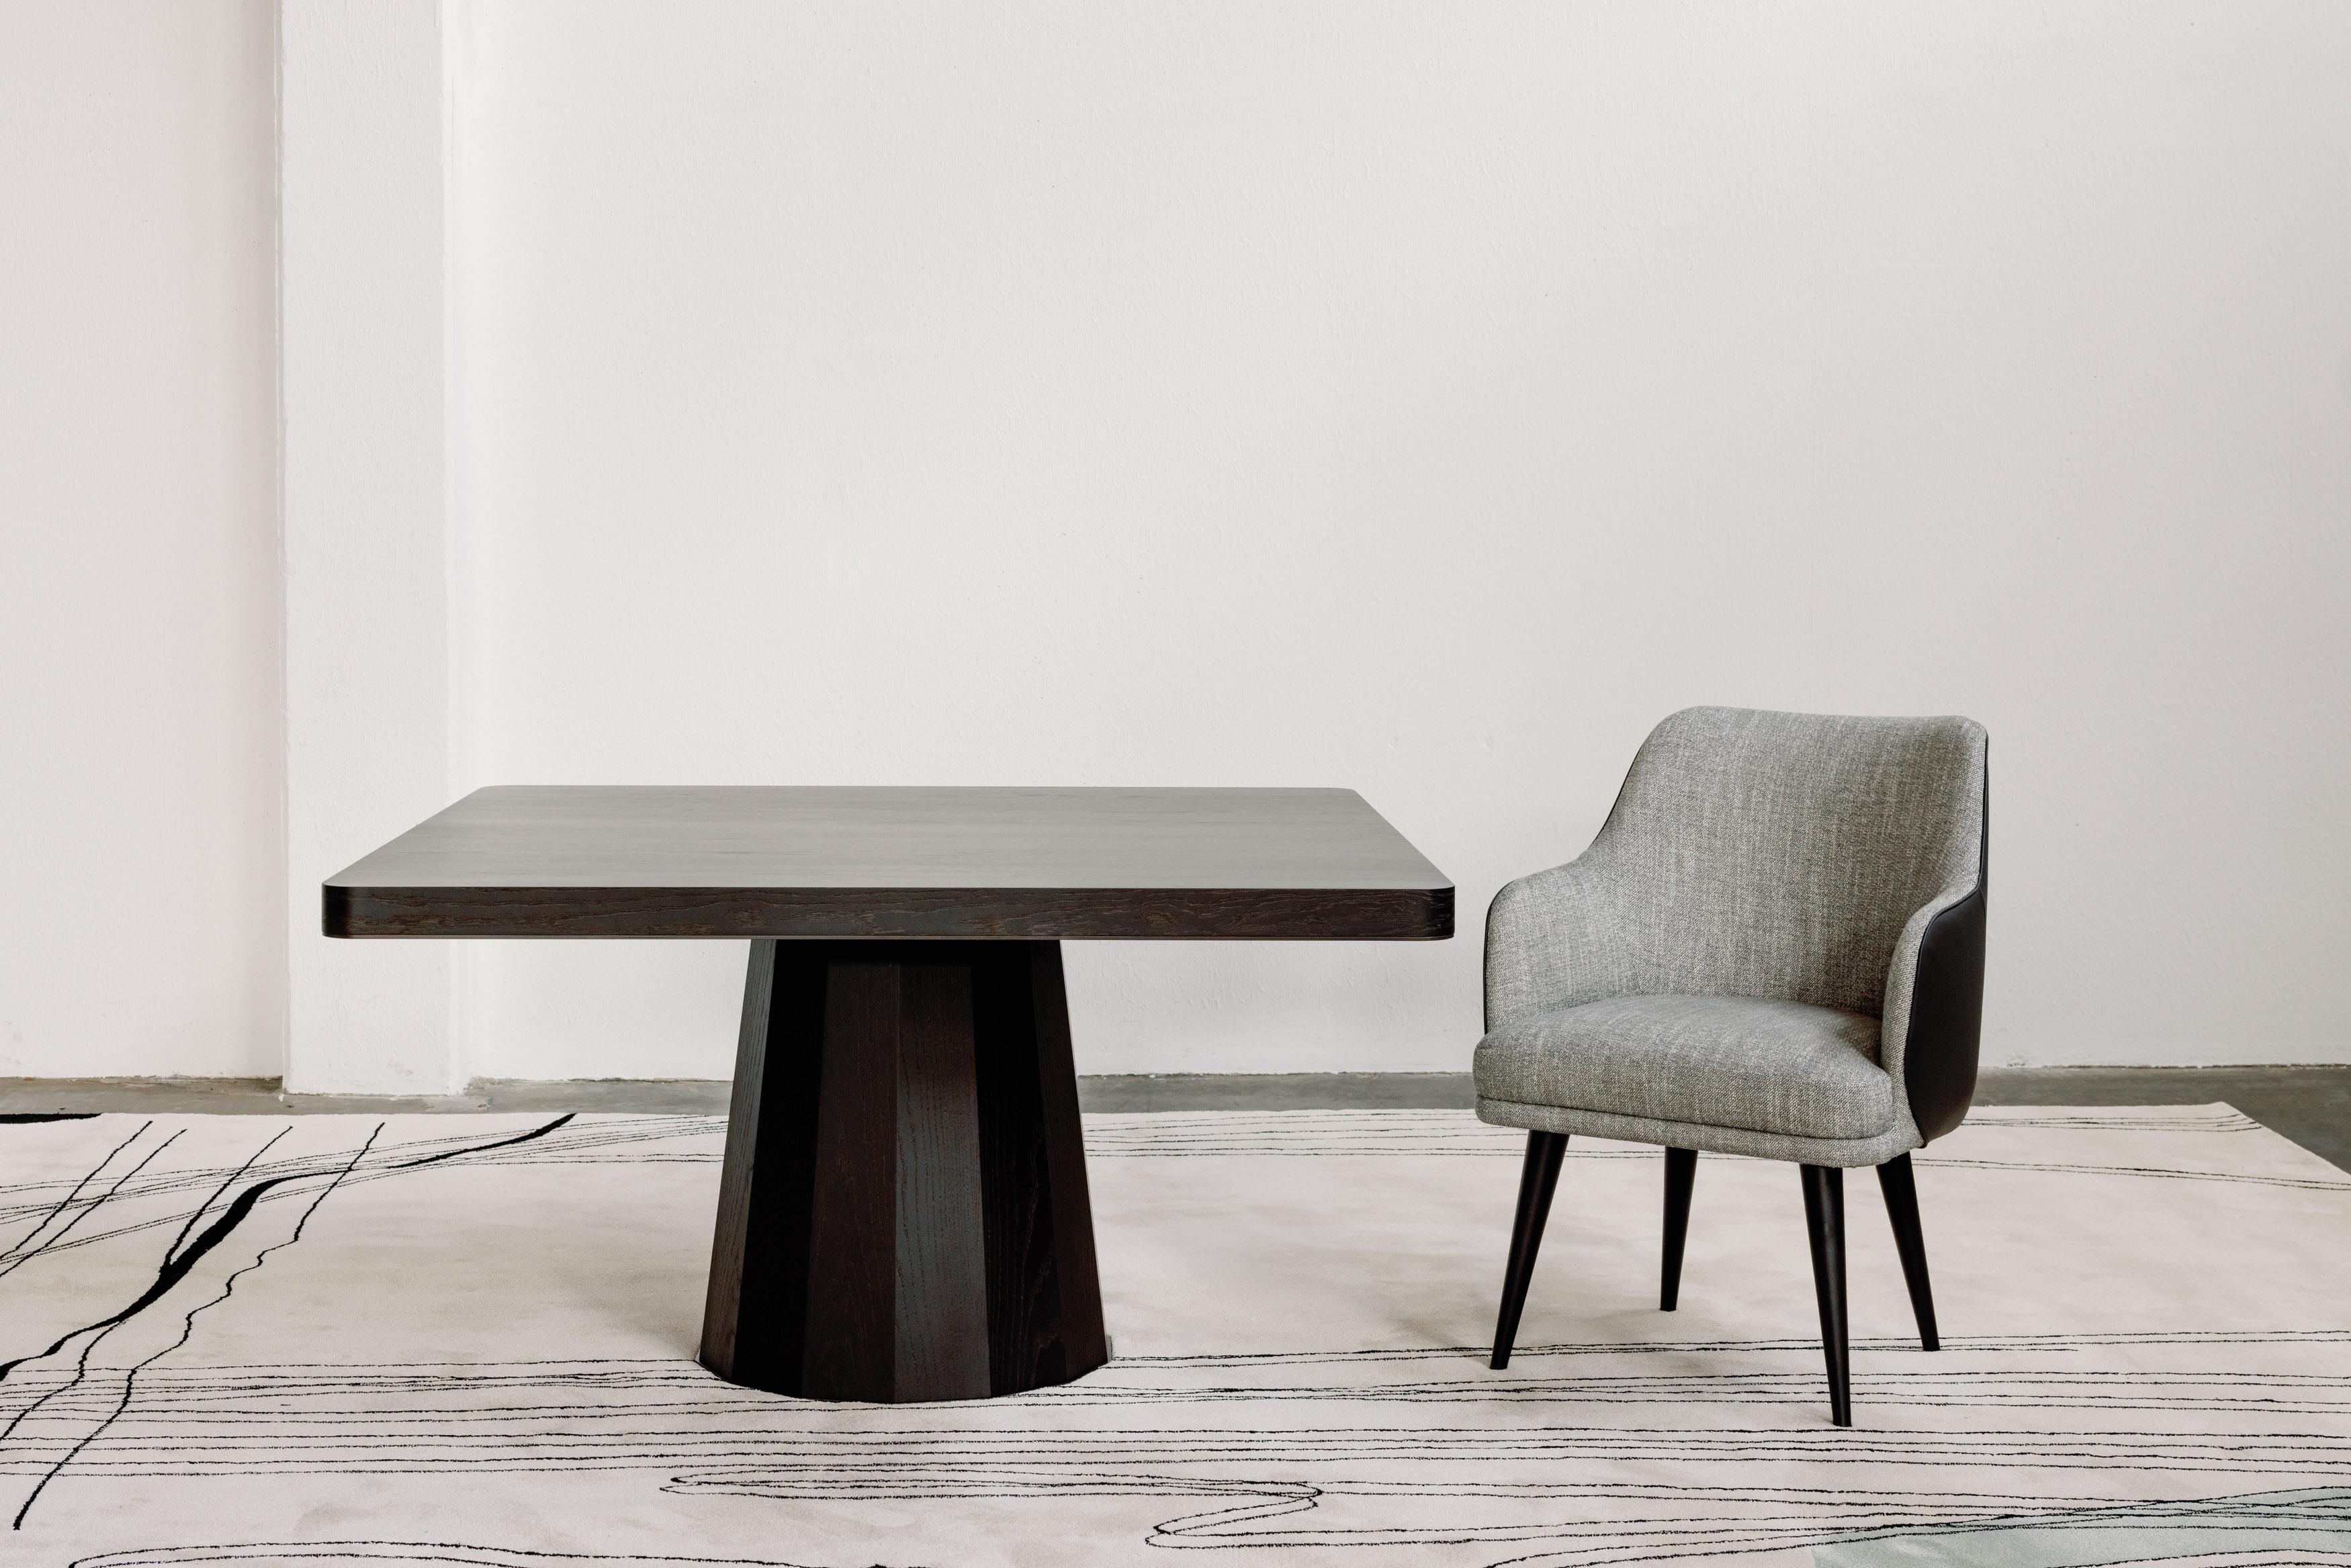 Margot chair, Modern Collection, Handcrafted in Portugal - Europe by GF Modern.

The Margot leather dining chair stands as a contemporary piece that redefines the standards of modern living. The interplay of soft, graceful lines and premium